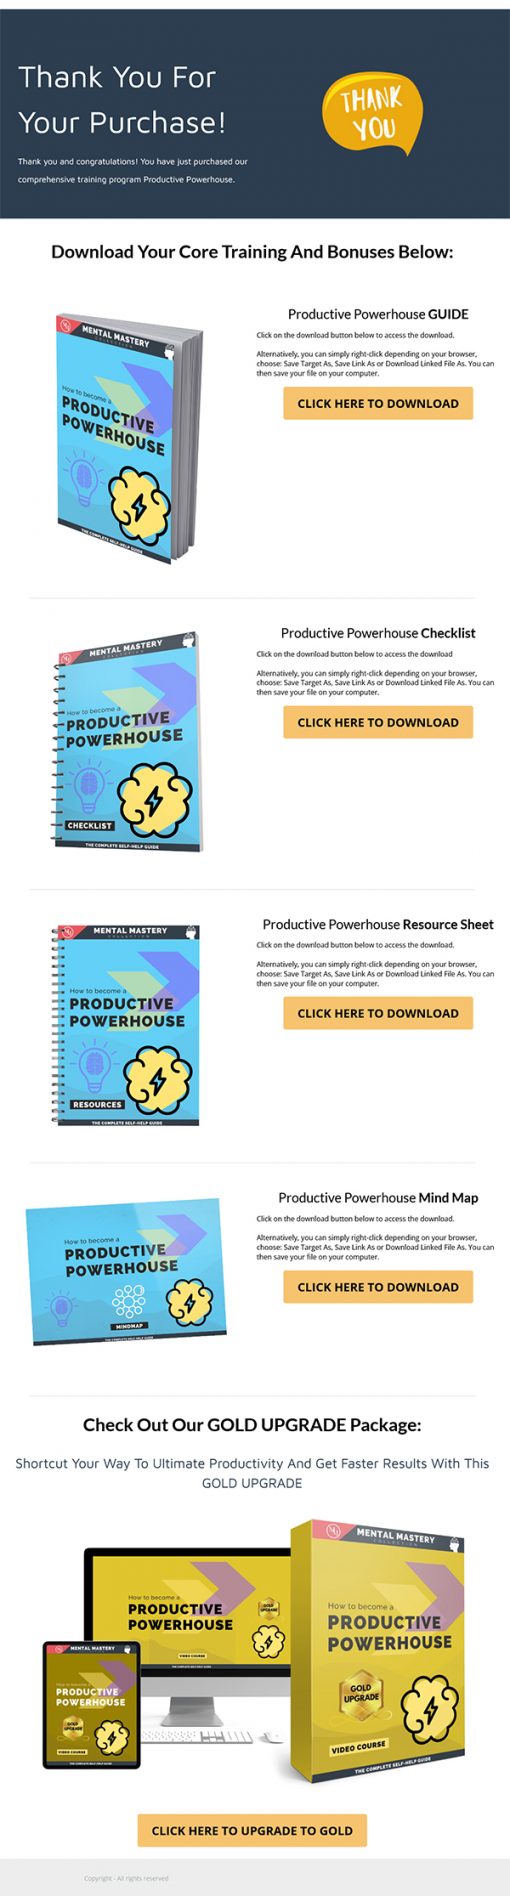 Productive Powerhouse Ebook and Videos MRR